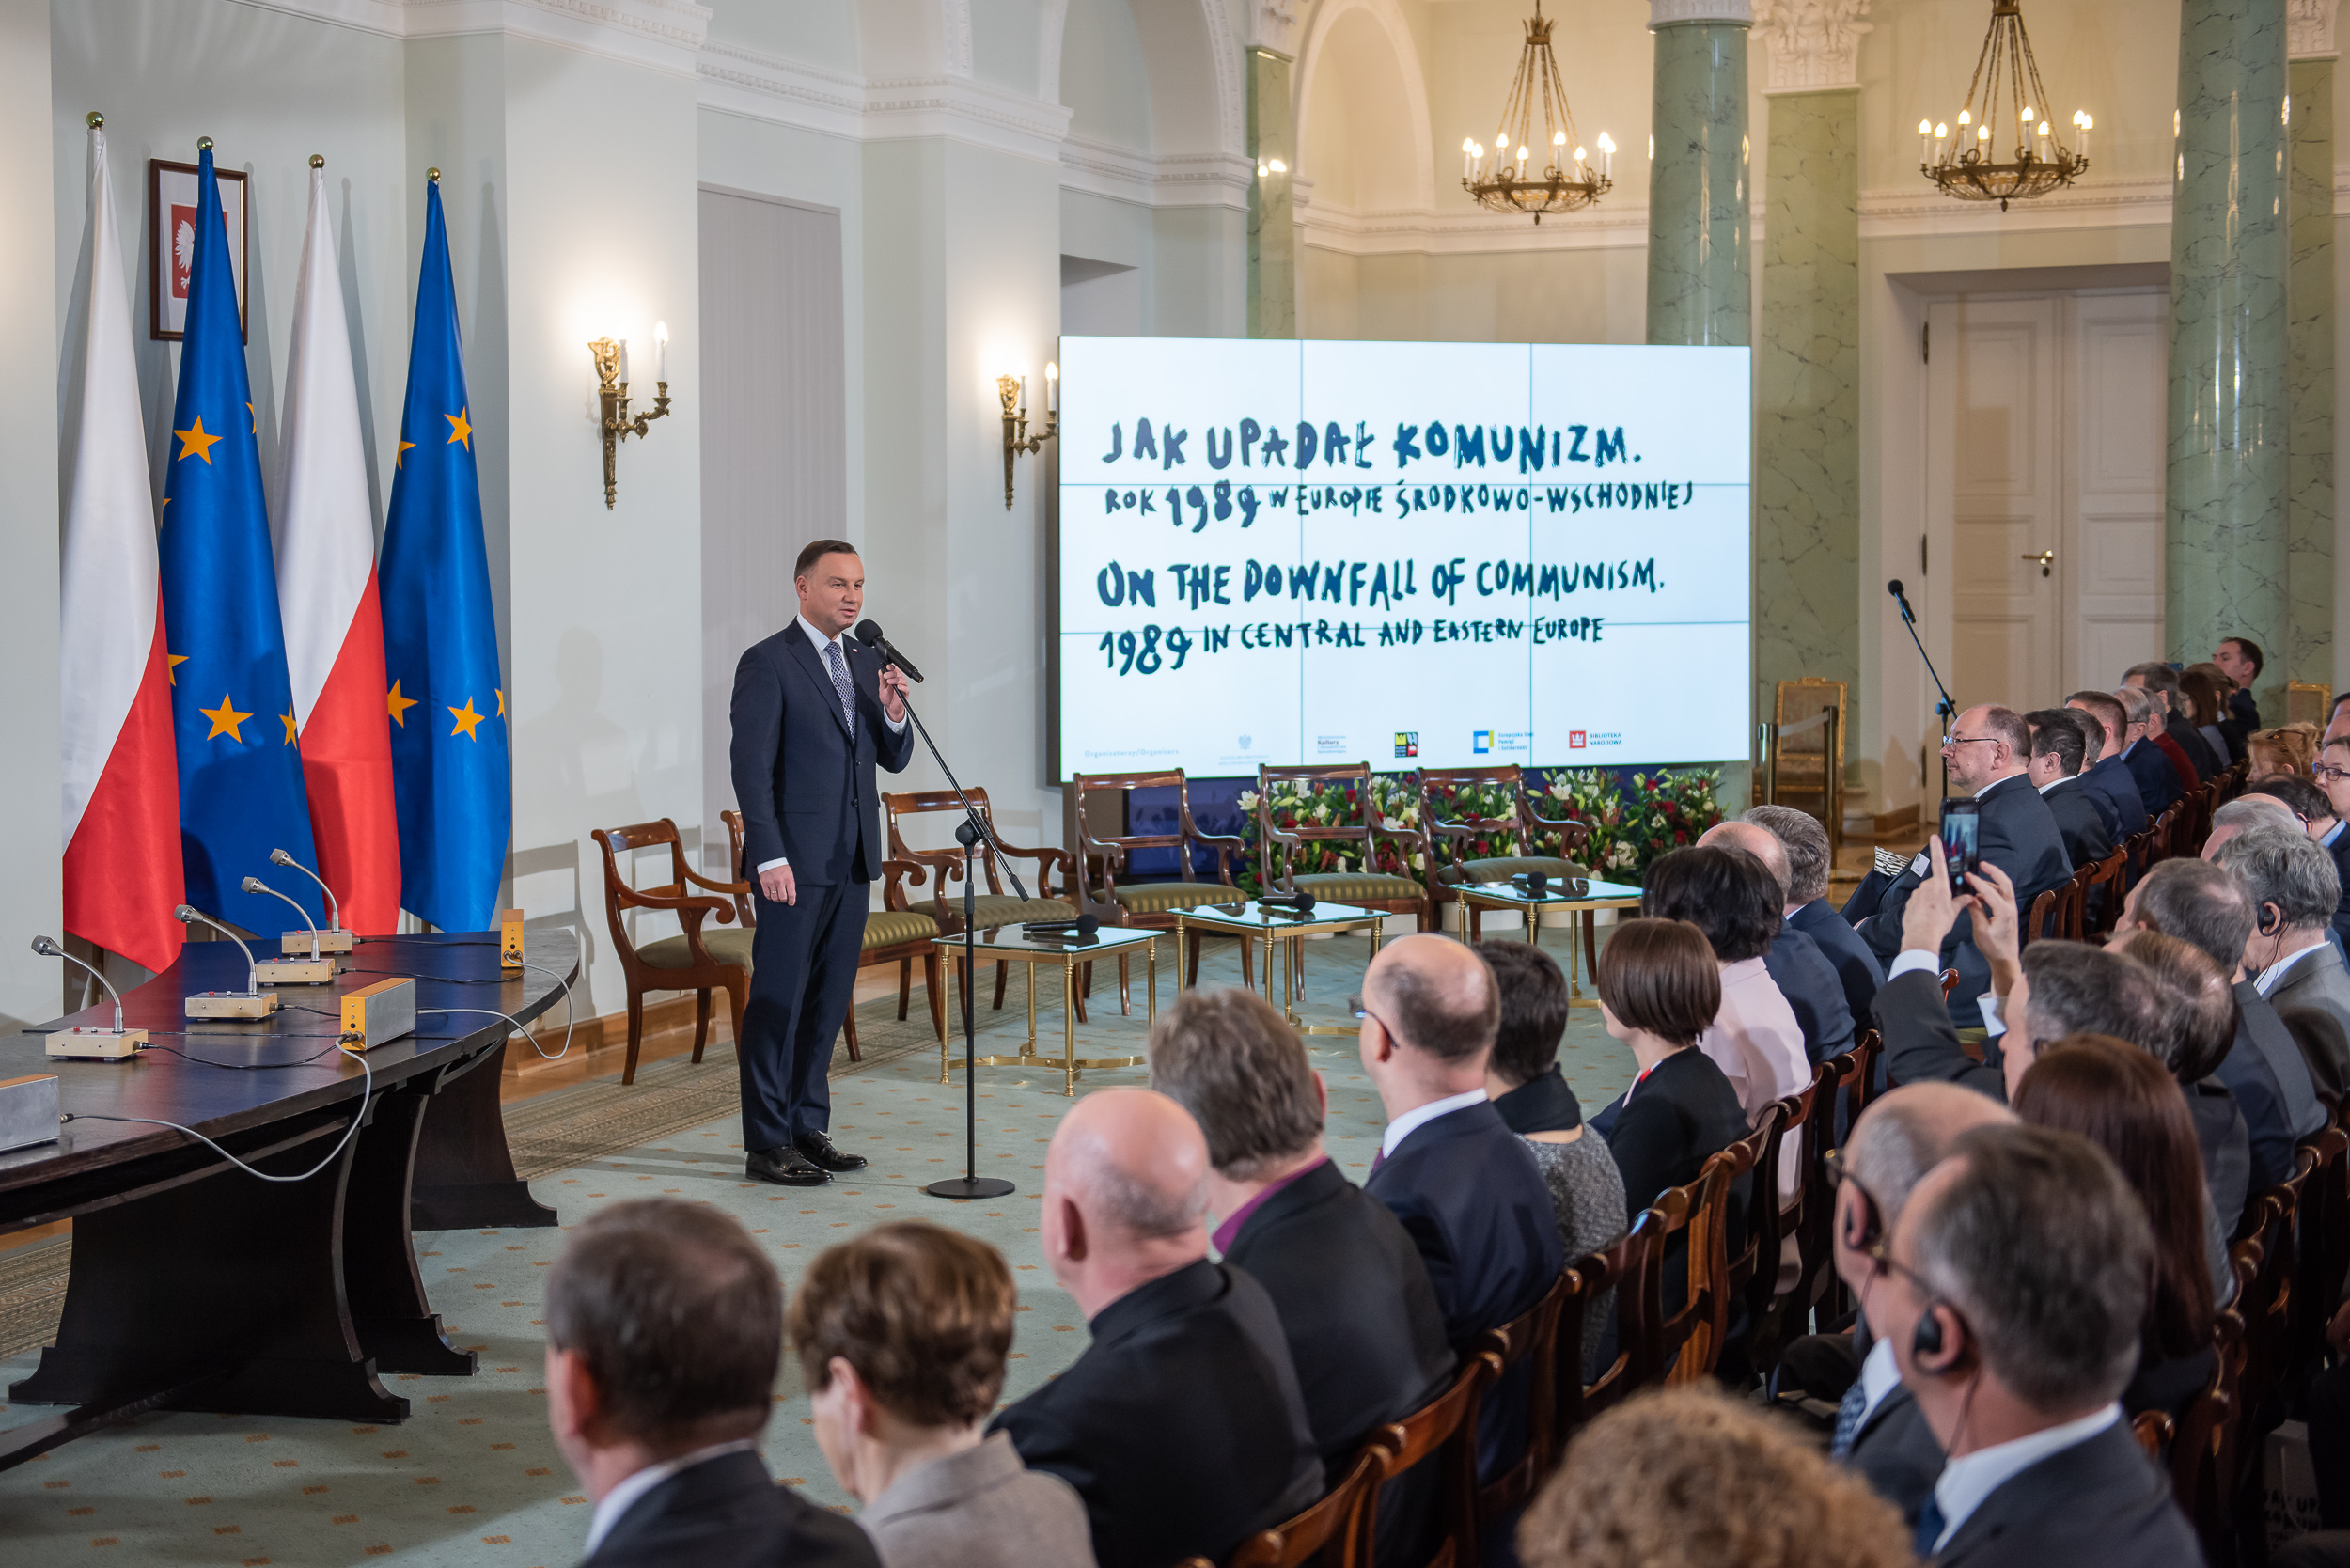 President of Poland opens „On the downfall of communism” conference